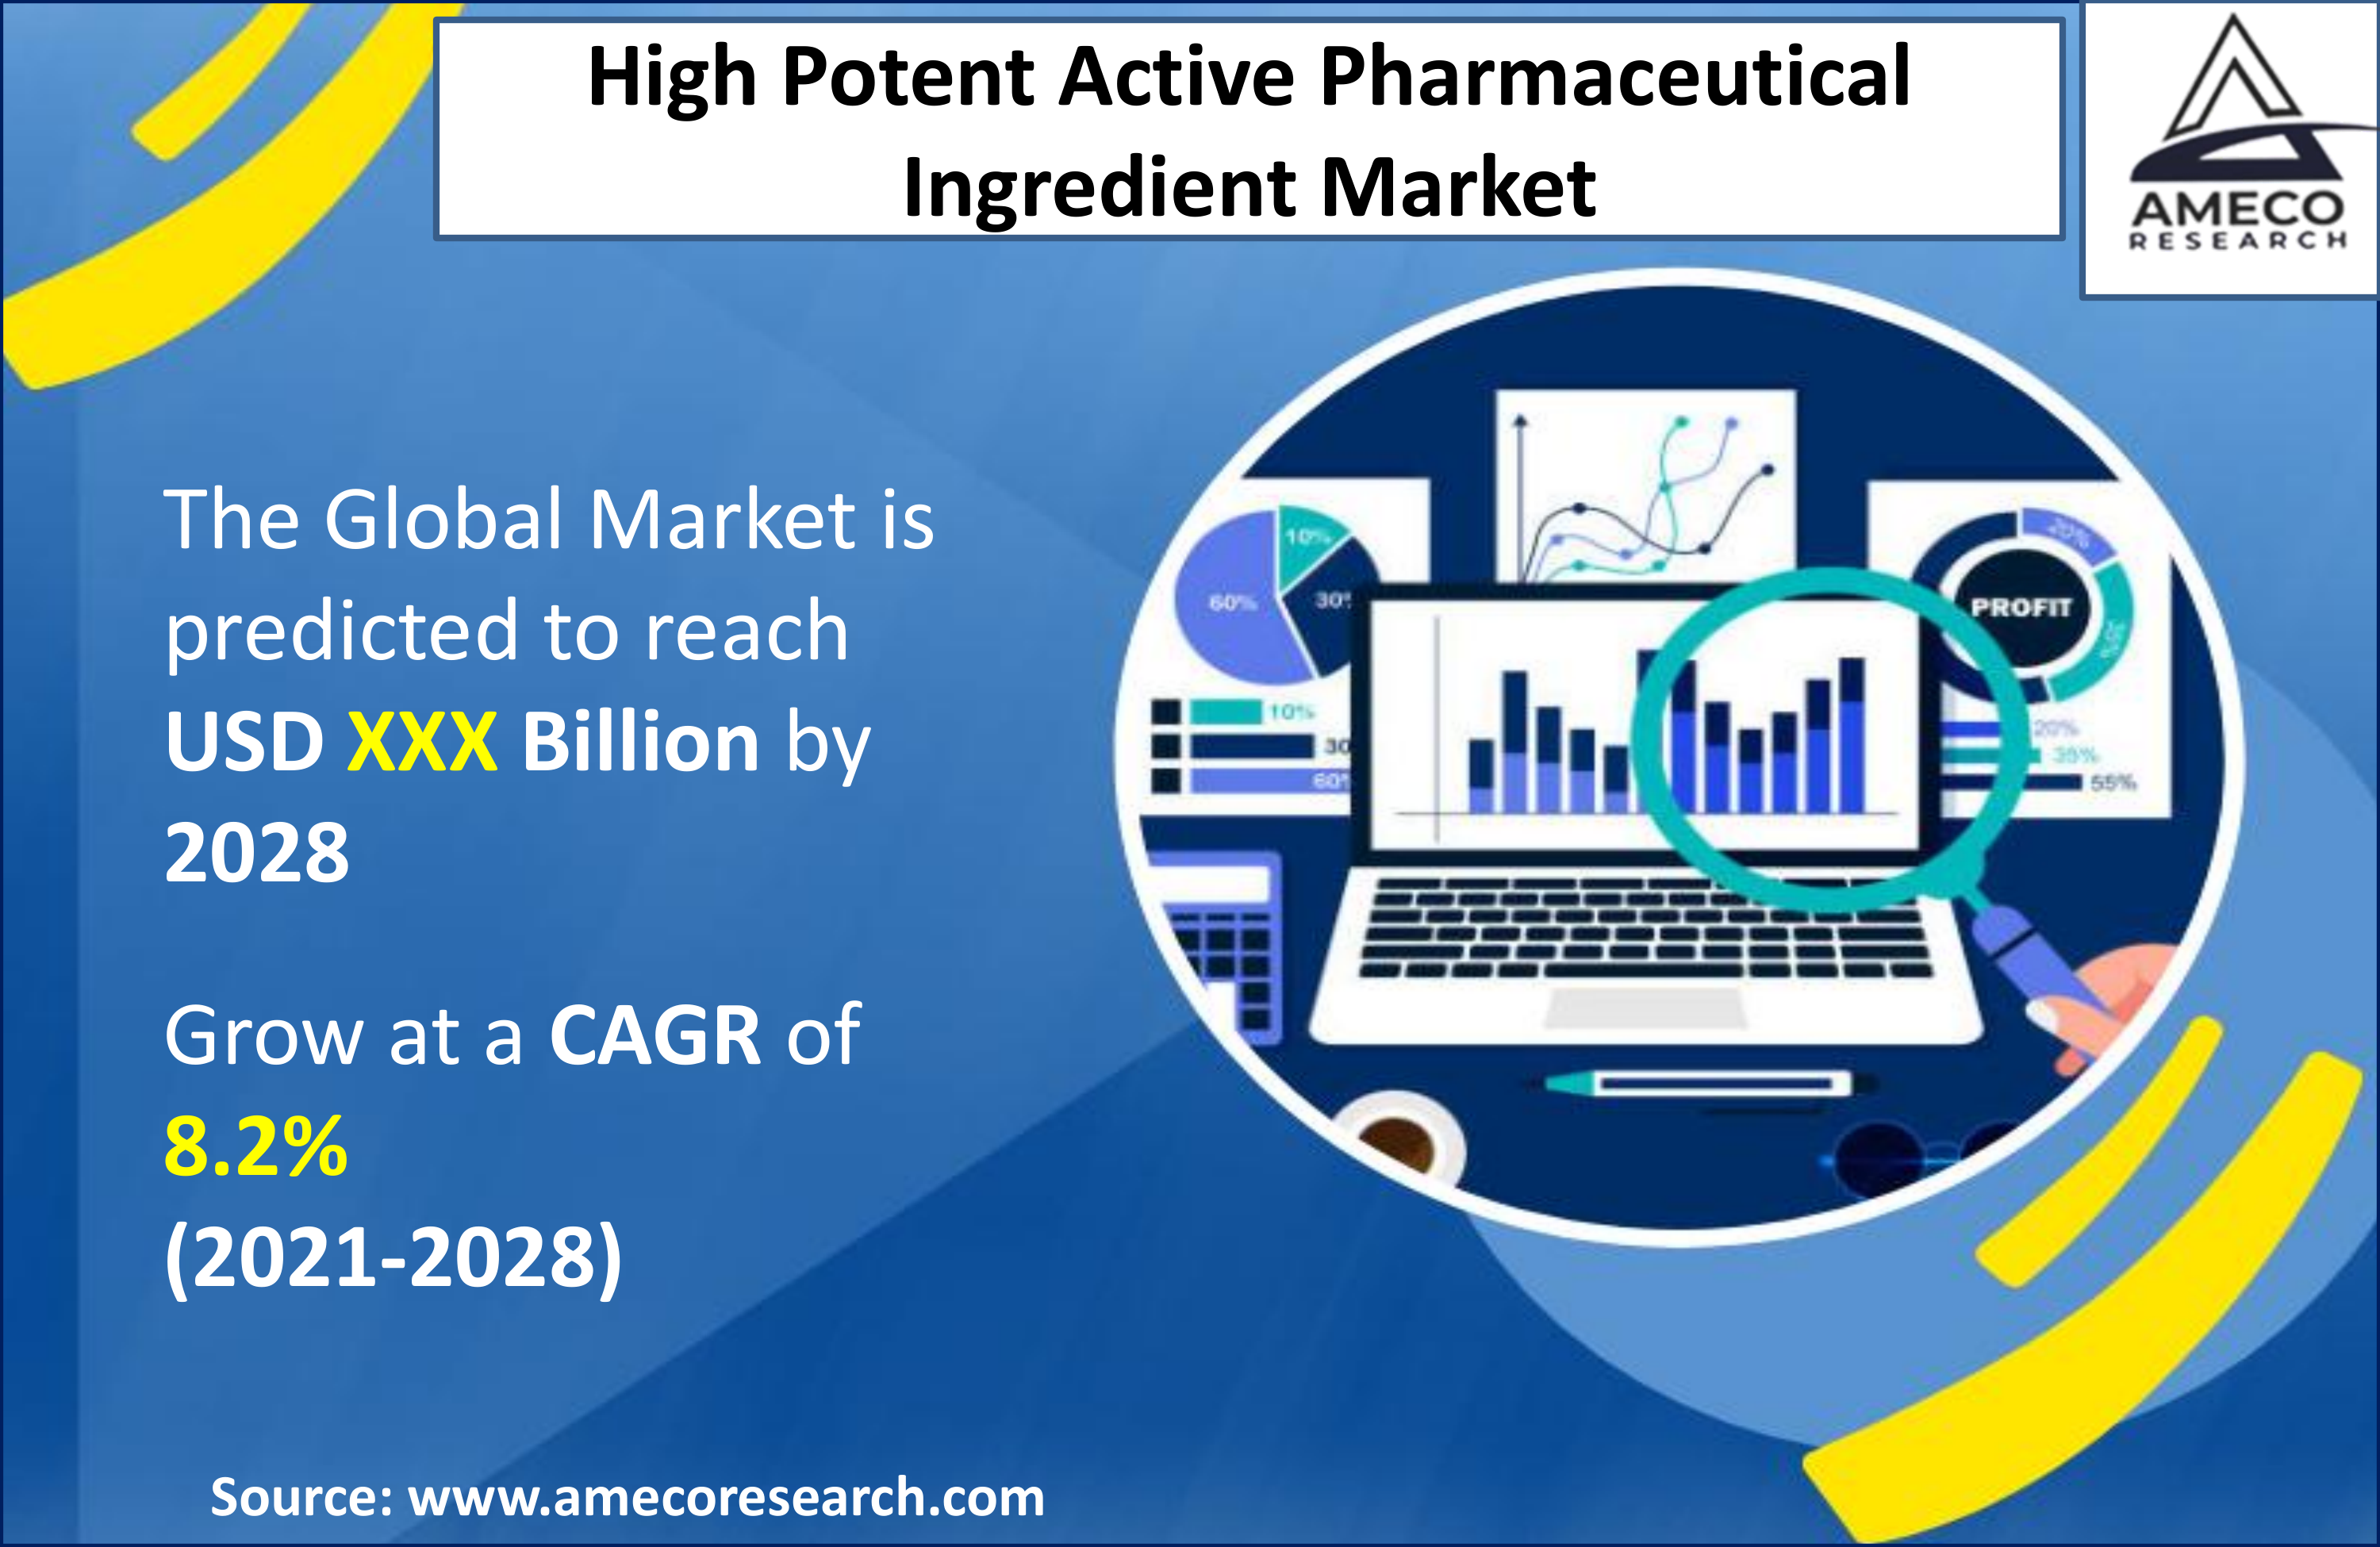 High Potent Active Pharmaceutical Ingredient Market